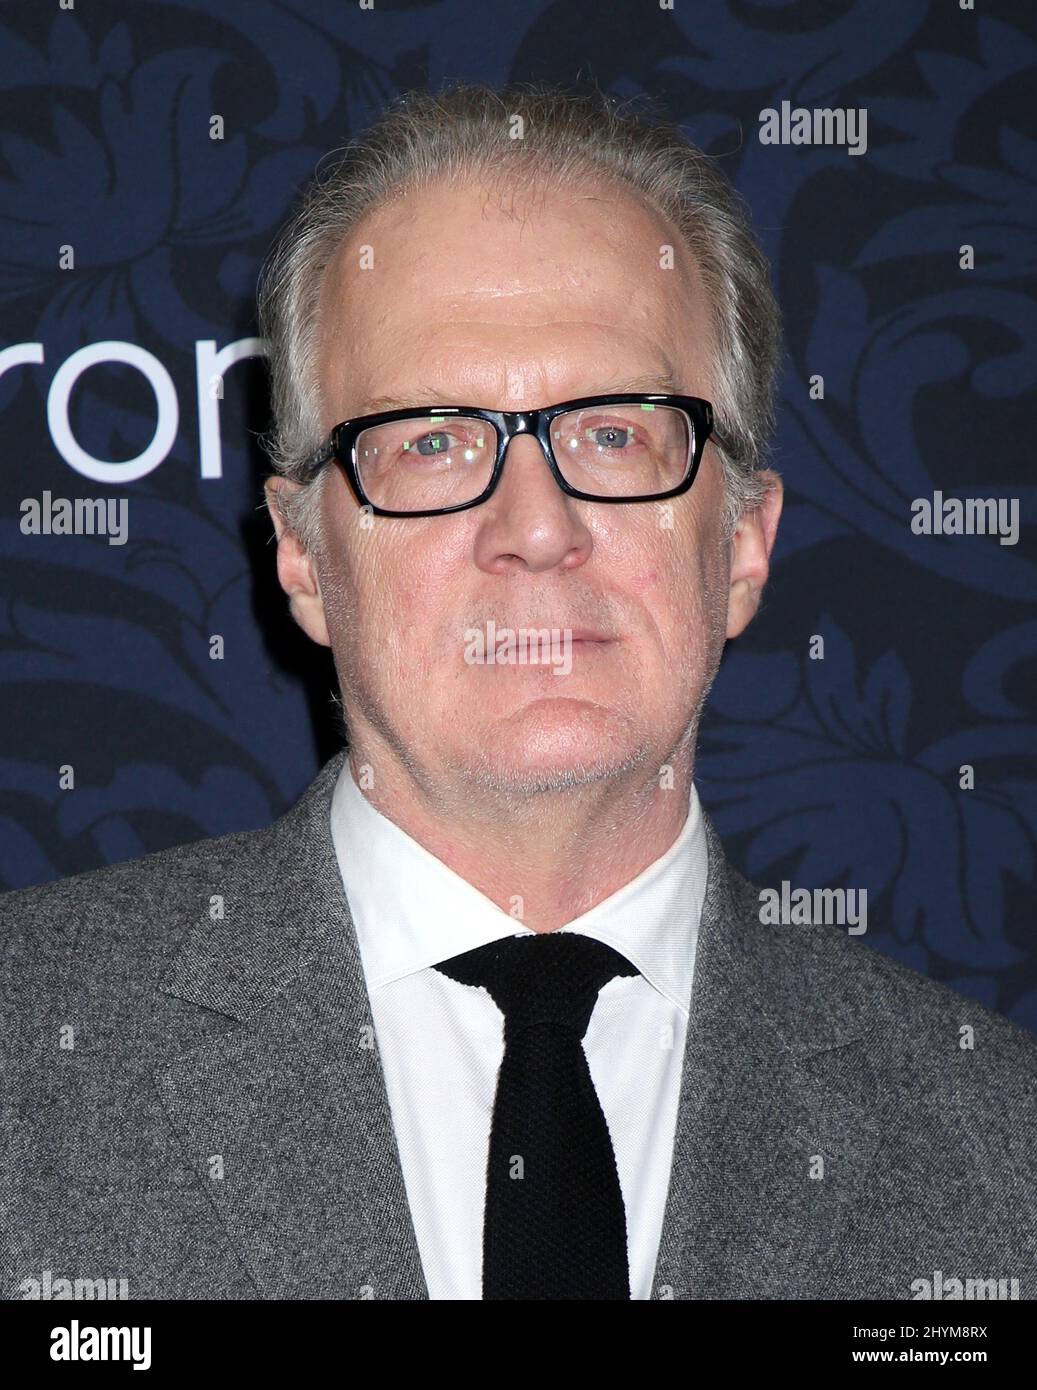 Tracy Letts attending the premiere of Little Women in New York Stock Photo